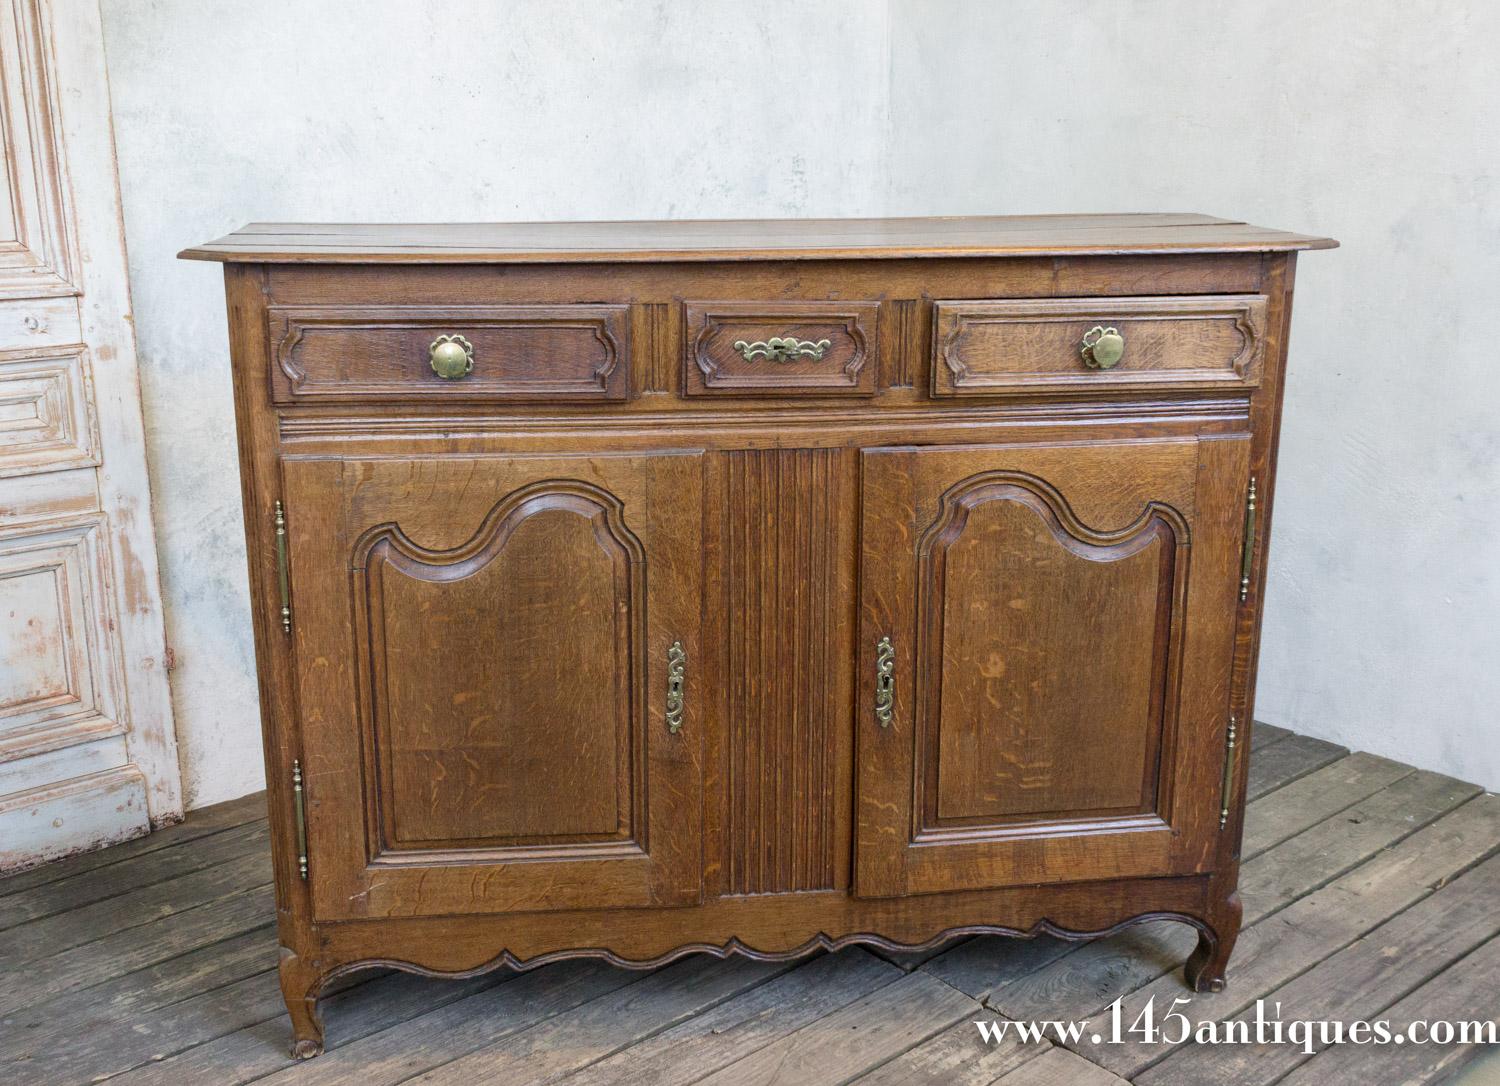 This beautiful French Provincial Louis XV oak buffet still has its original old wax patina and brass hardware and it has two doors and three drawers on the top. Made in the north of France in the early 19th century, it is a very solid and well made